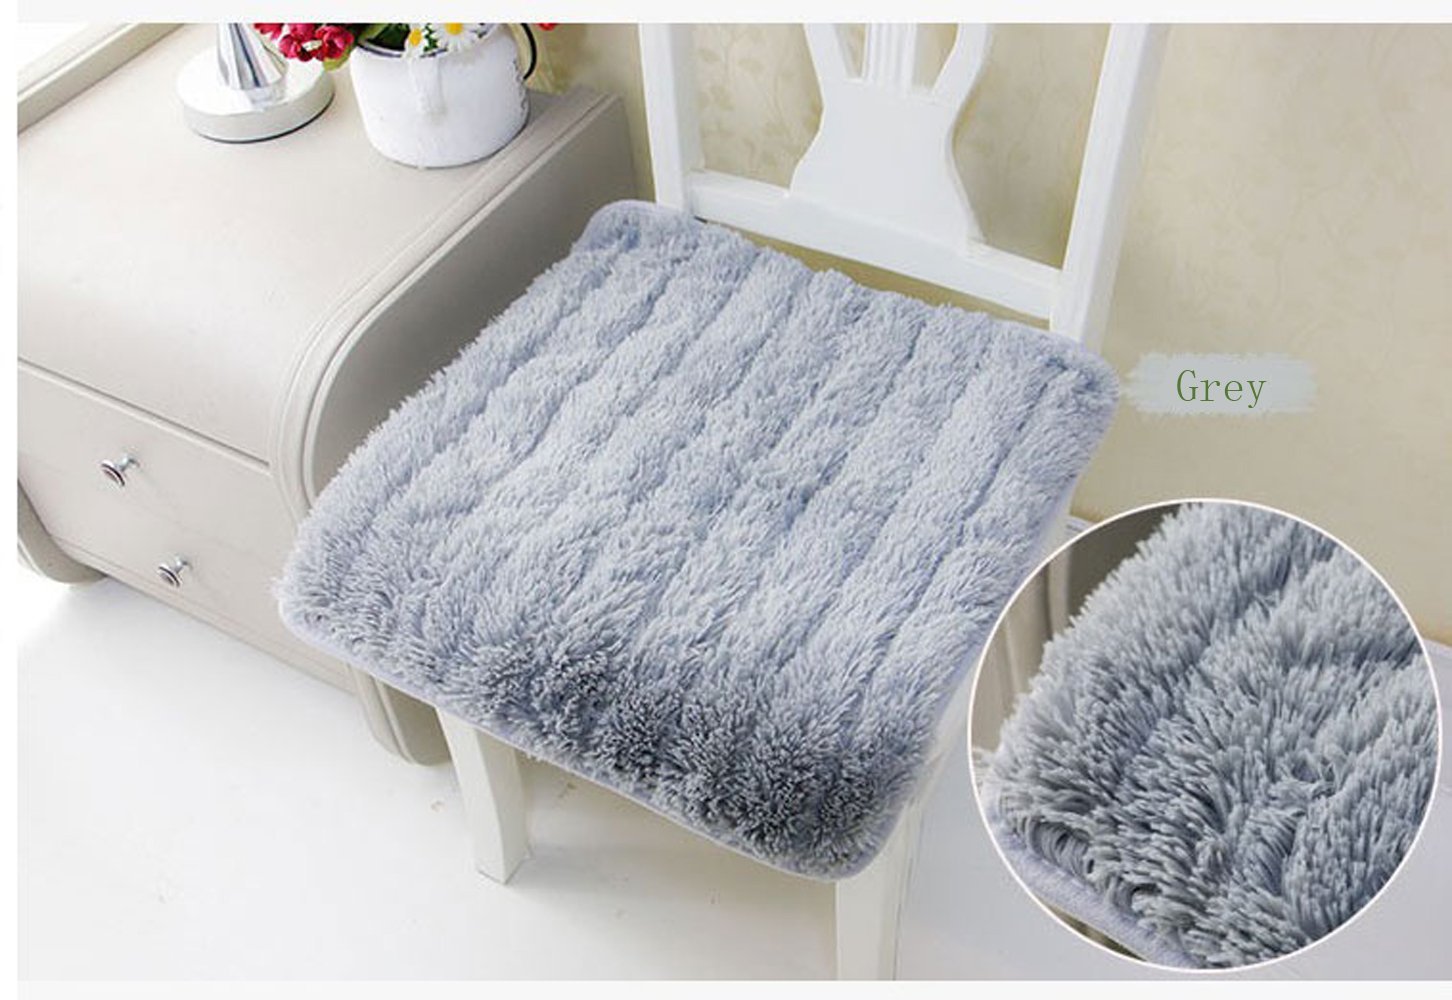 BXT Super Soft Faux Fur Chair Cushion with Ties Square Seat Pad Sofa Cover Non-Slip Backing Seat Cushion Rugs Carpet for Home Kitchen Office Dorm